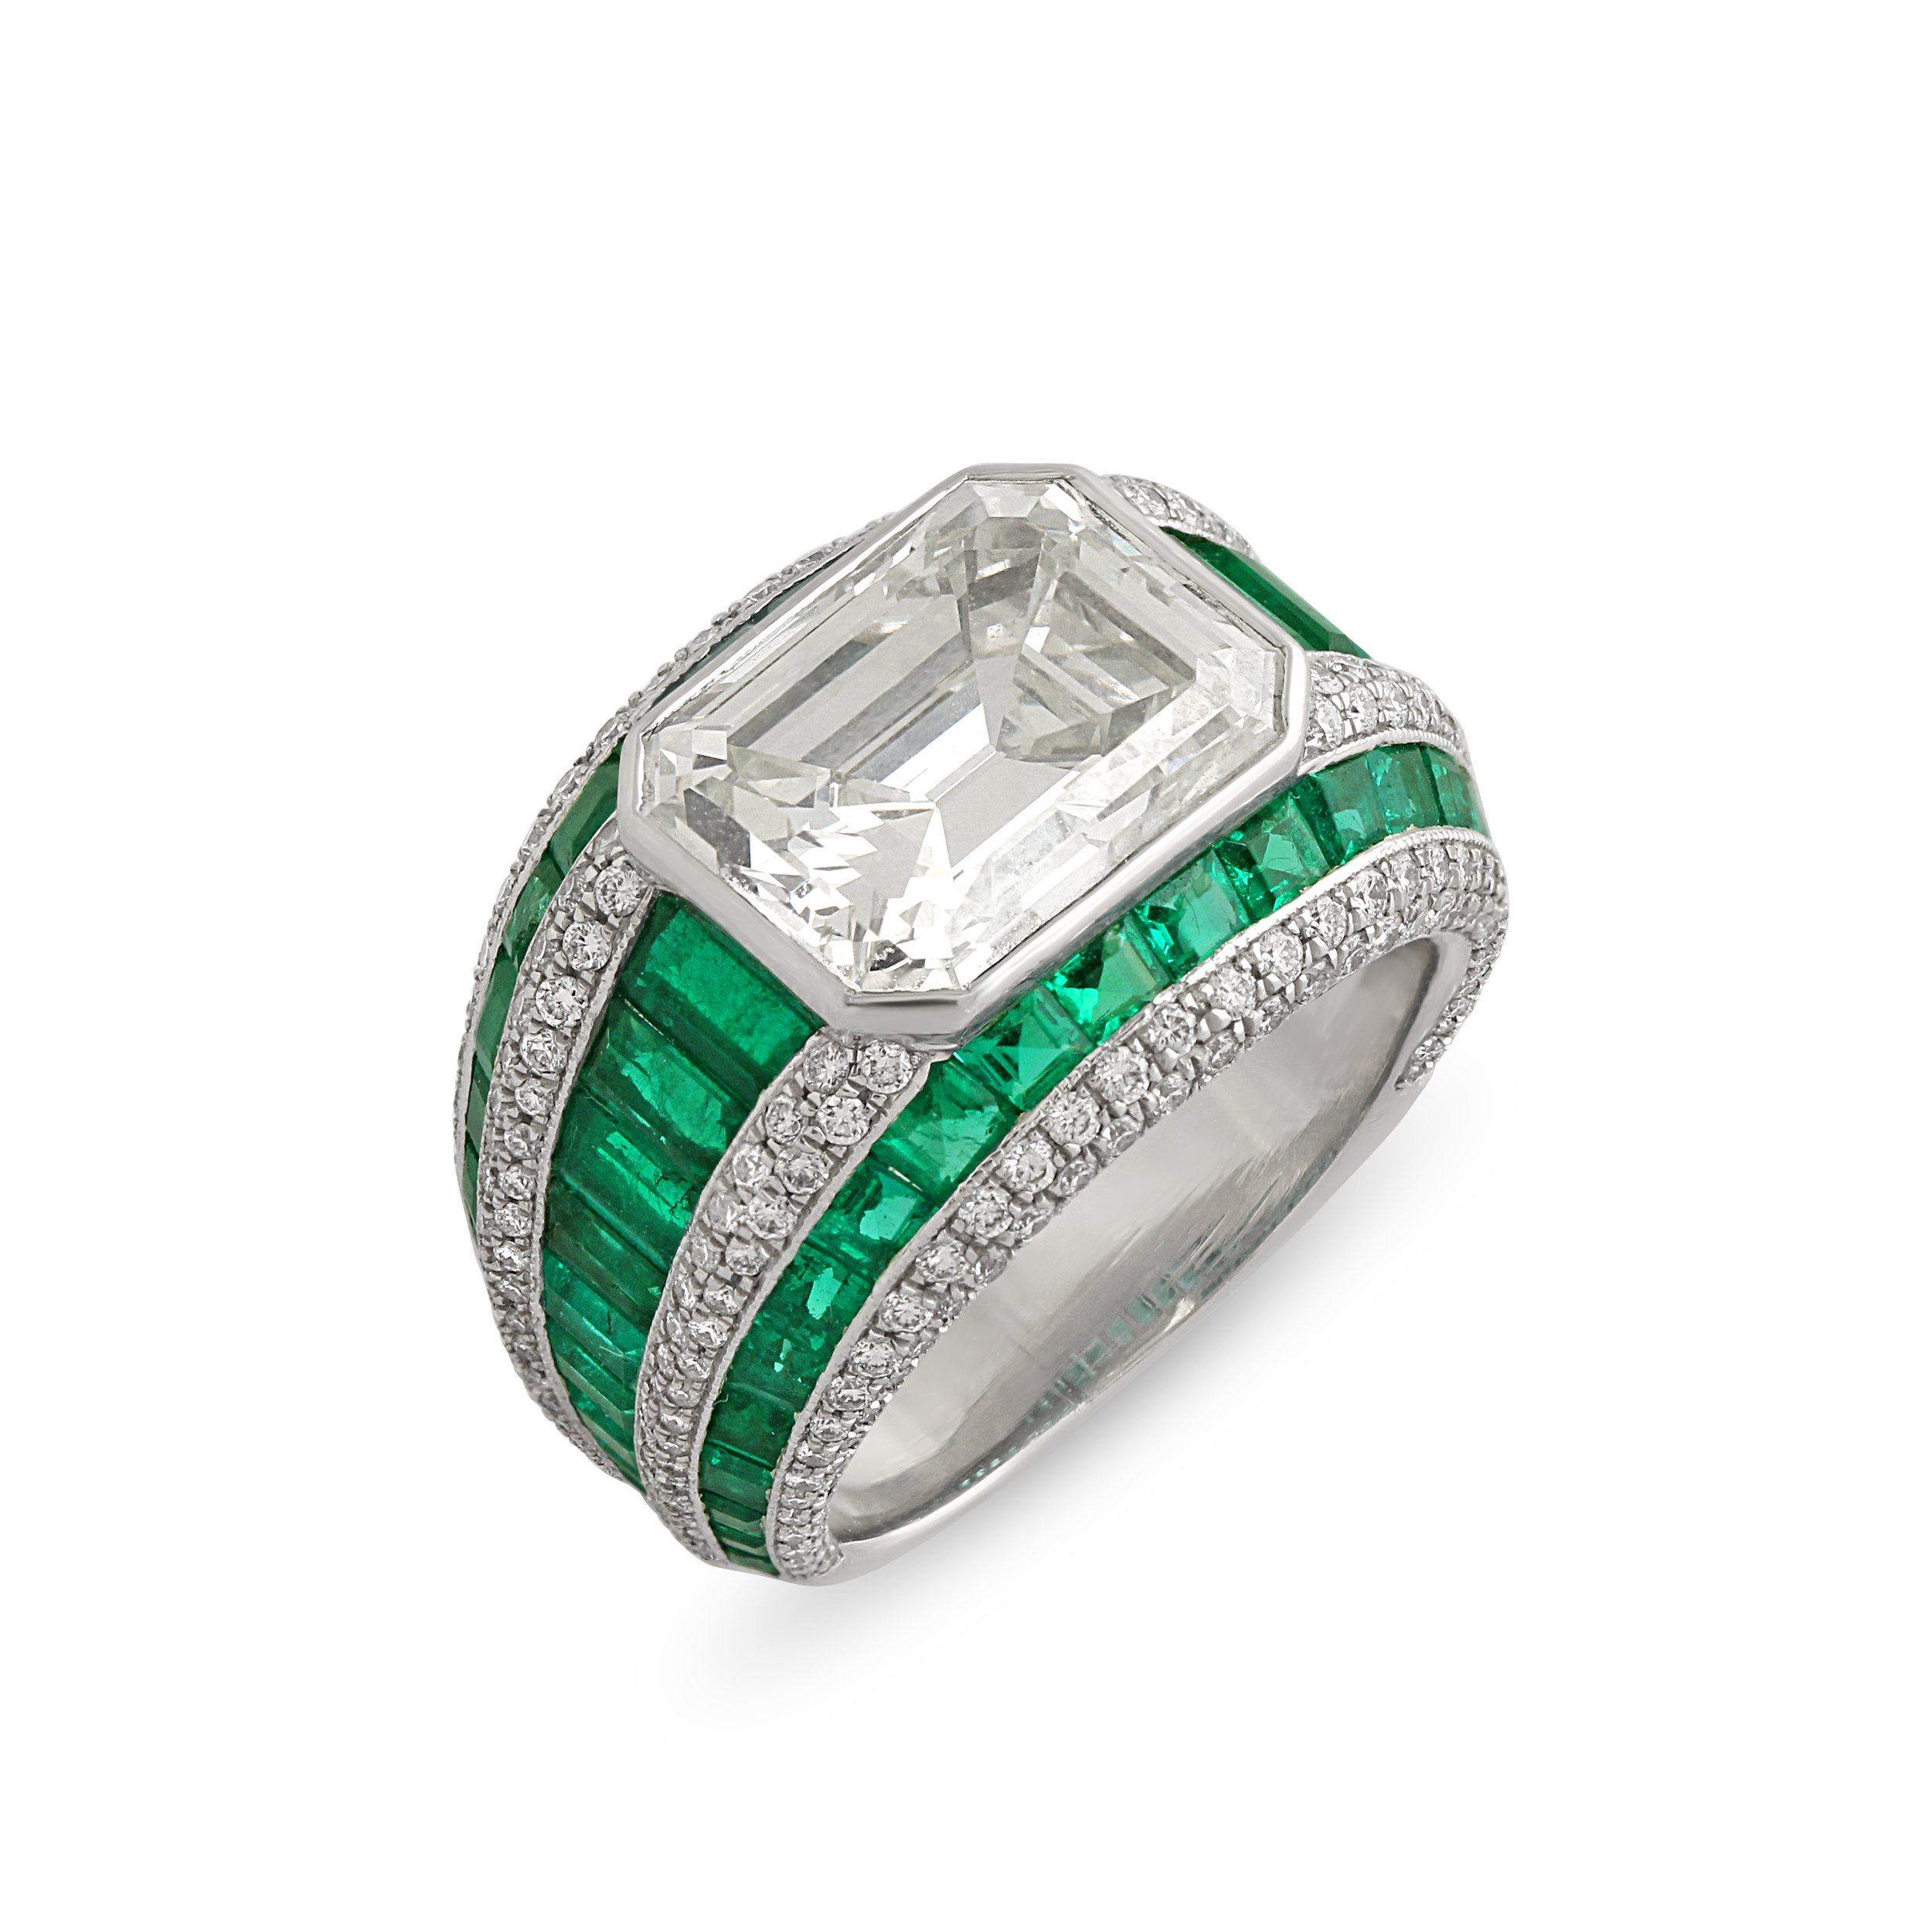 Silver gold plated large emerald cocktail ring – Gemma Azzurro